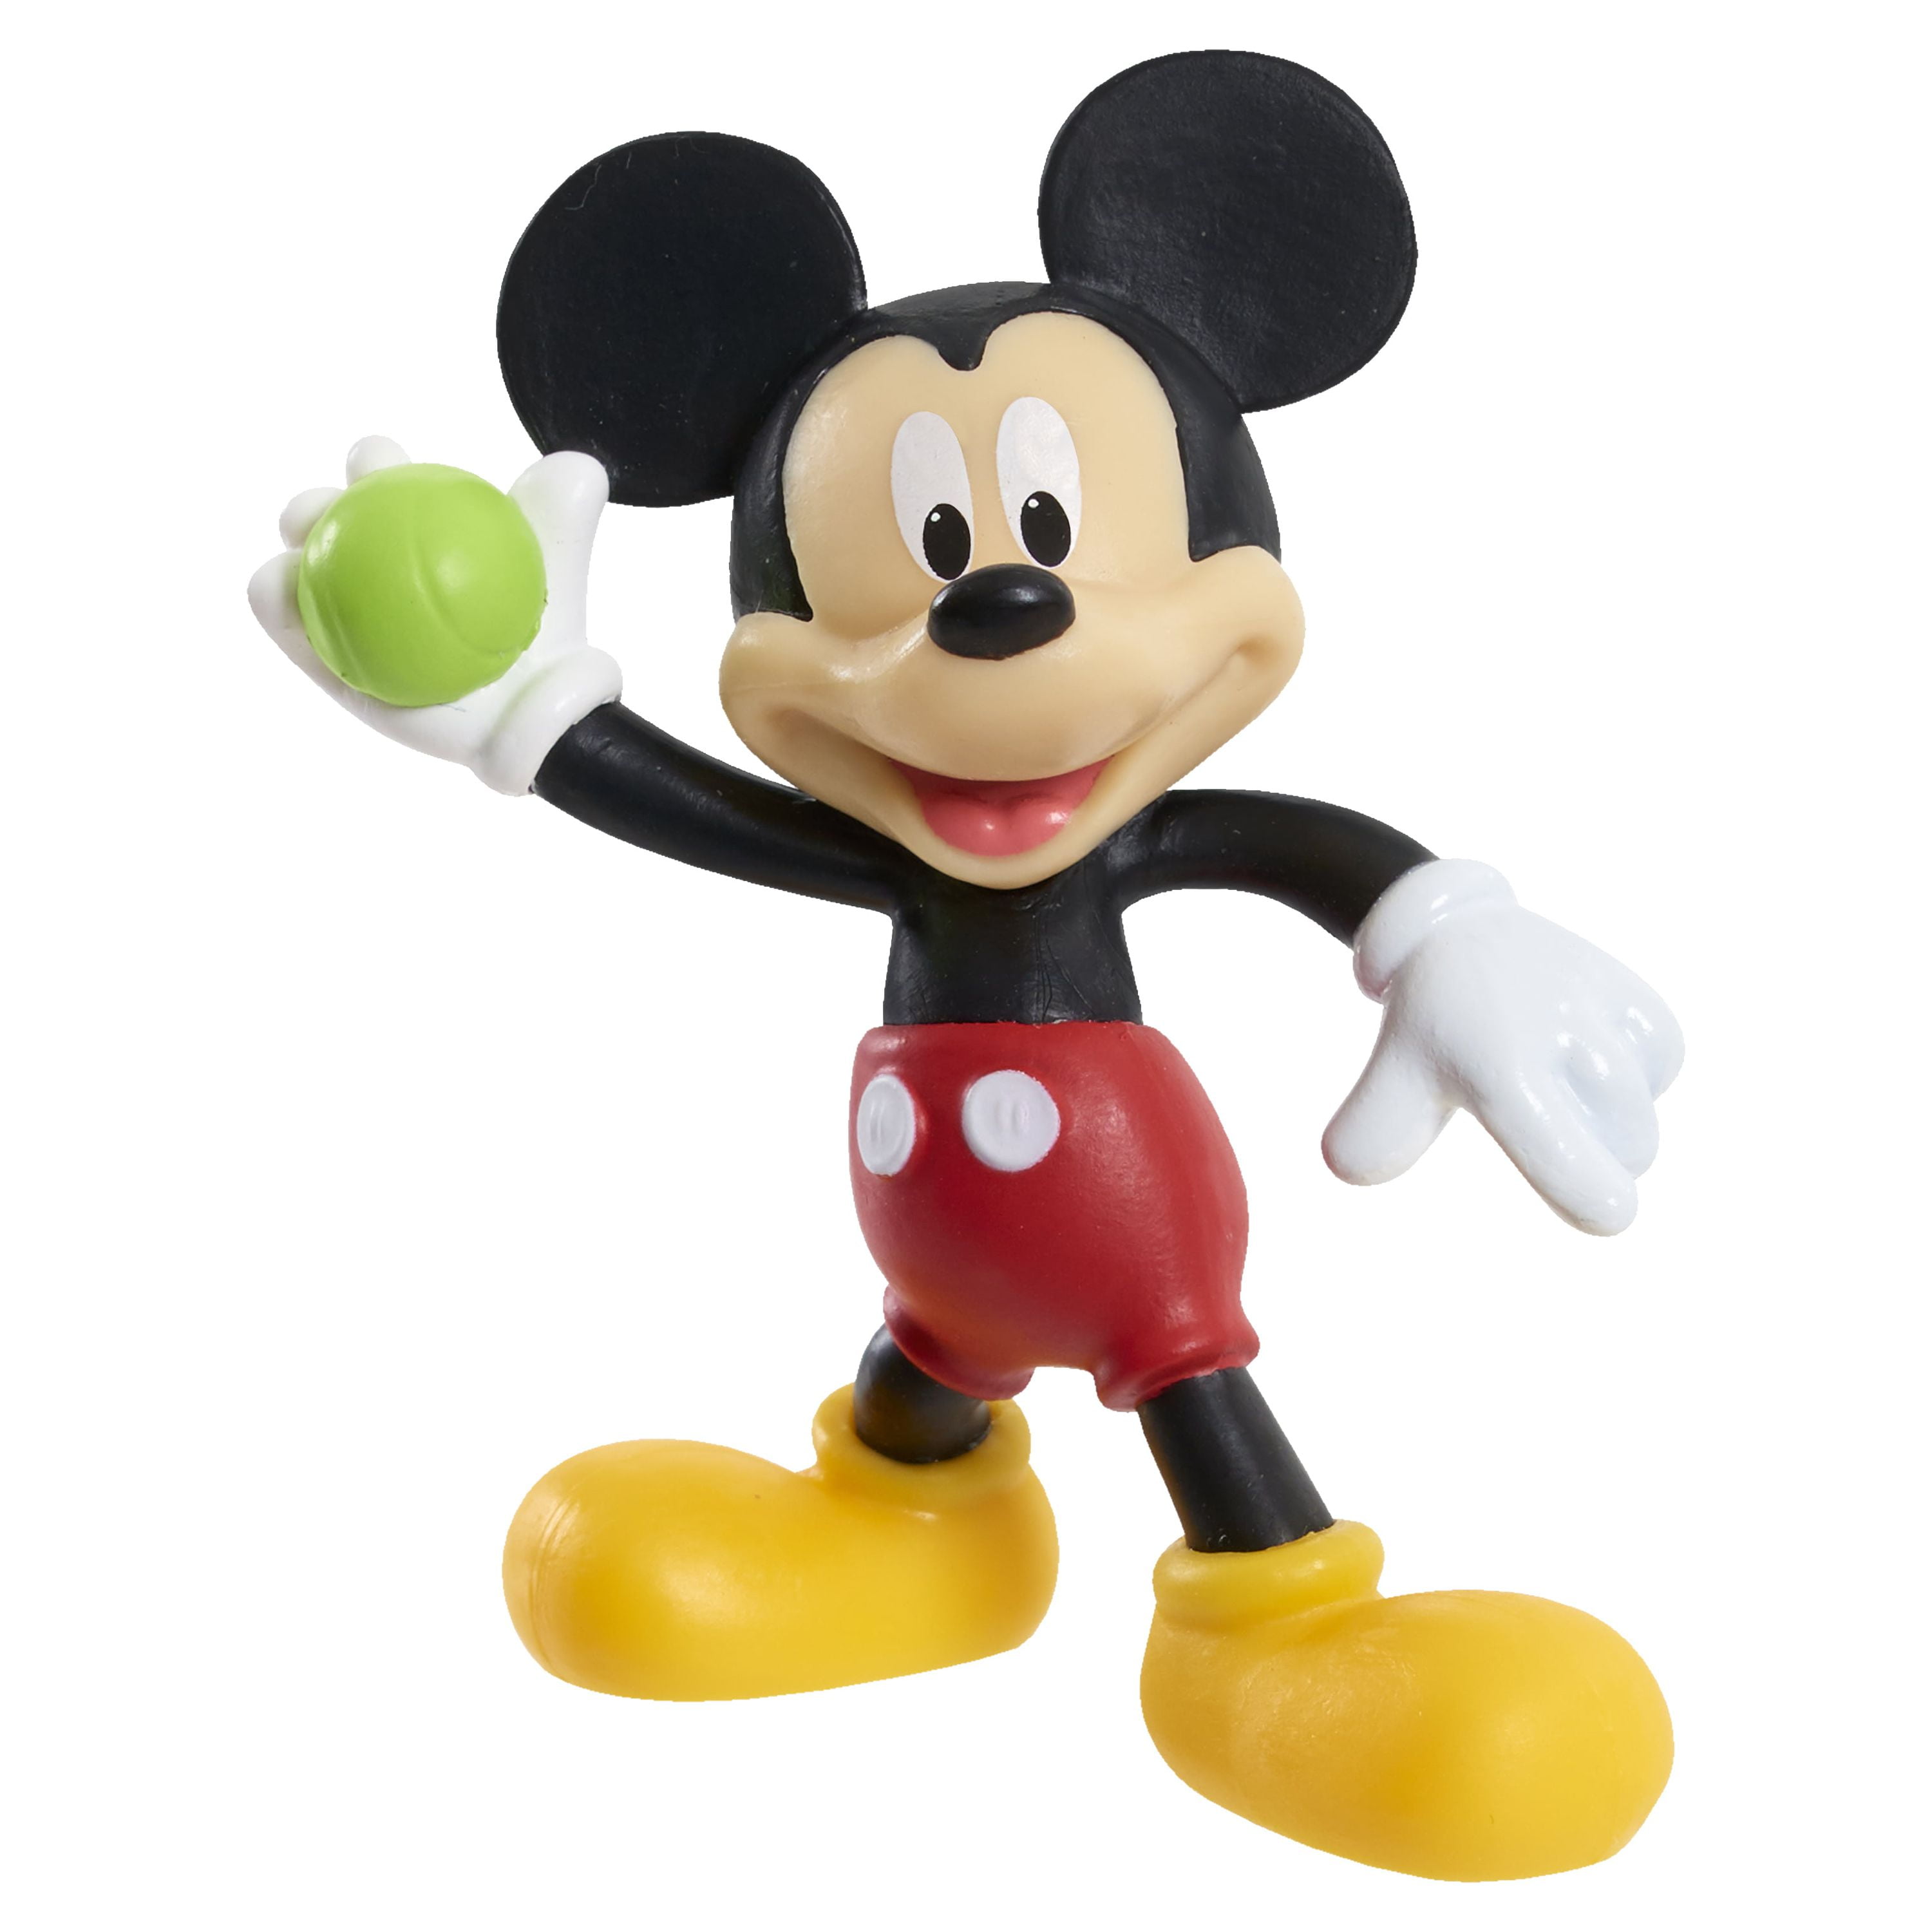 Disney Junior Mickey Mouse 7-Piece Figure Set, Kids Toys for Ages 3 Up, Size: 6.0 inches; 2.0 inches; 10.0 Inches